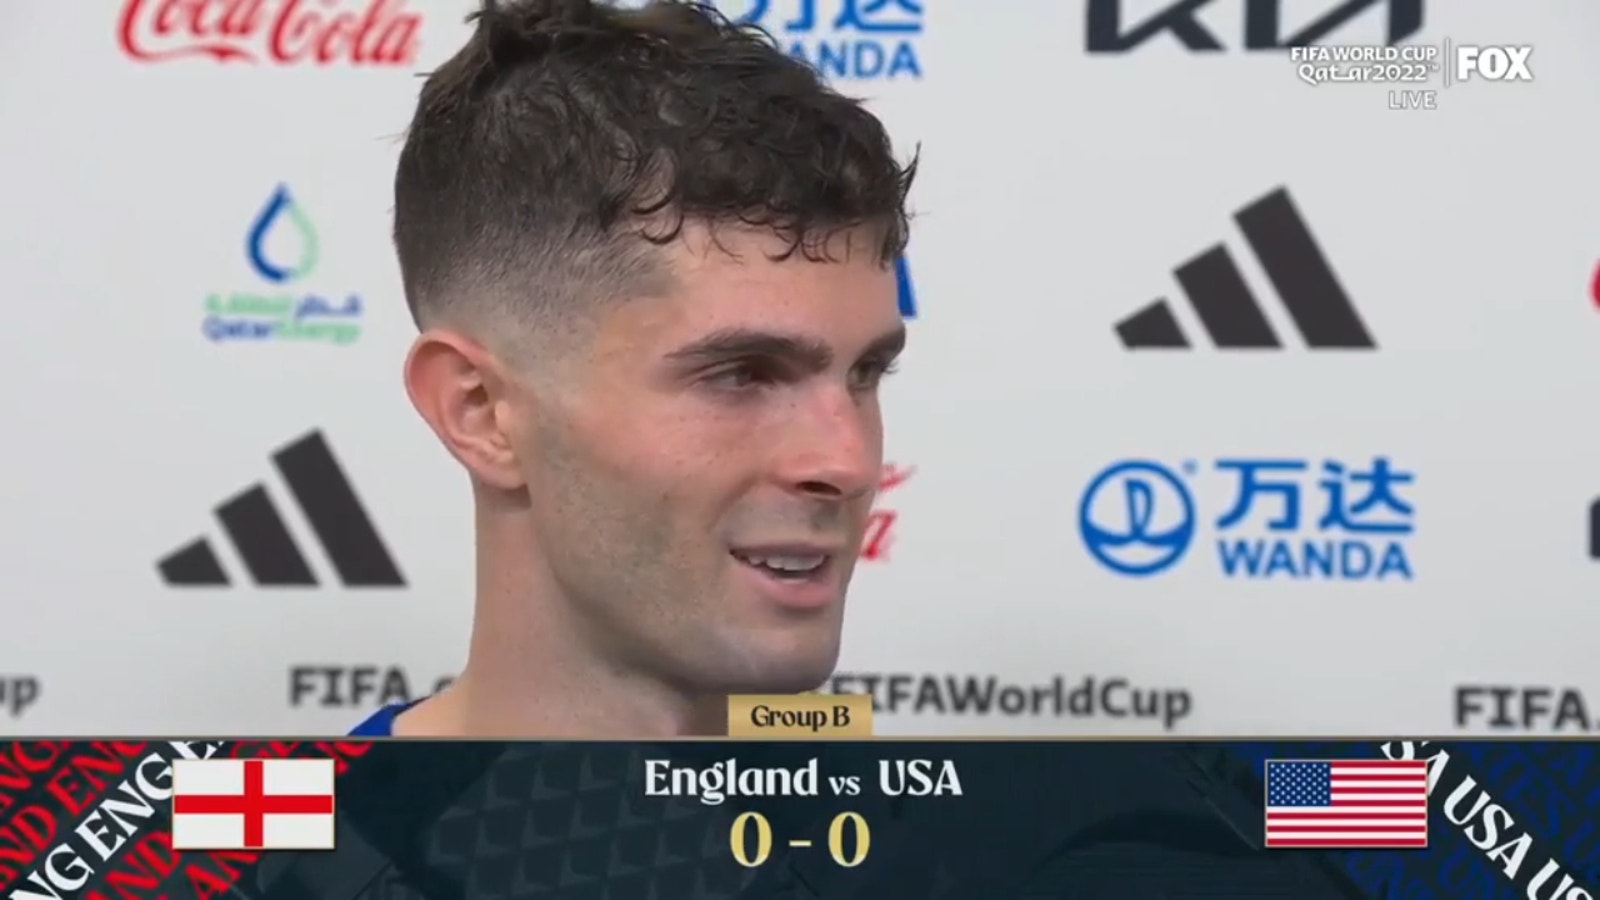 Christian Pulisic shows gratitude for American support